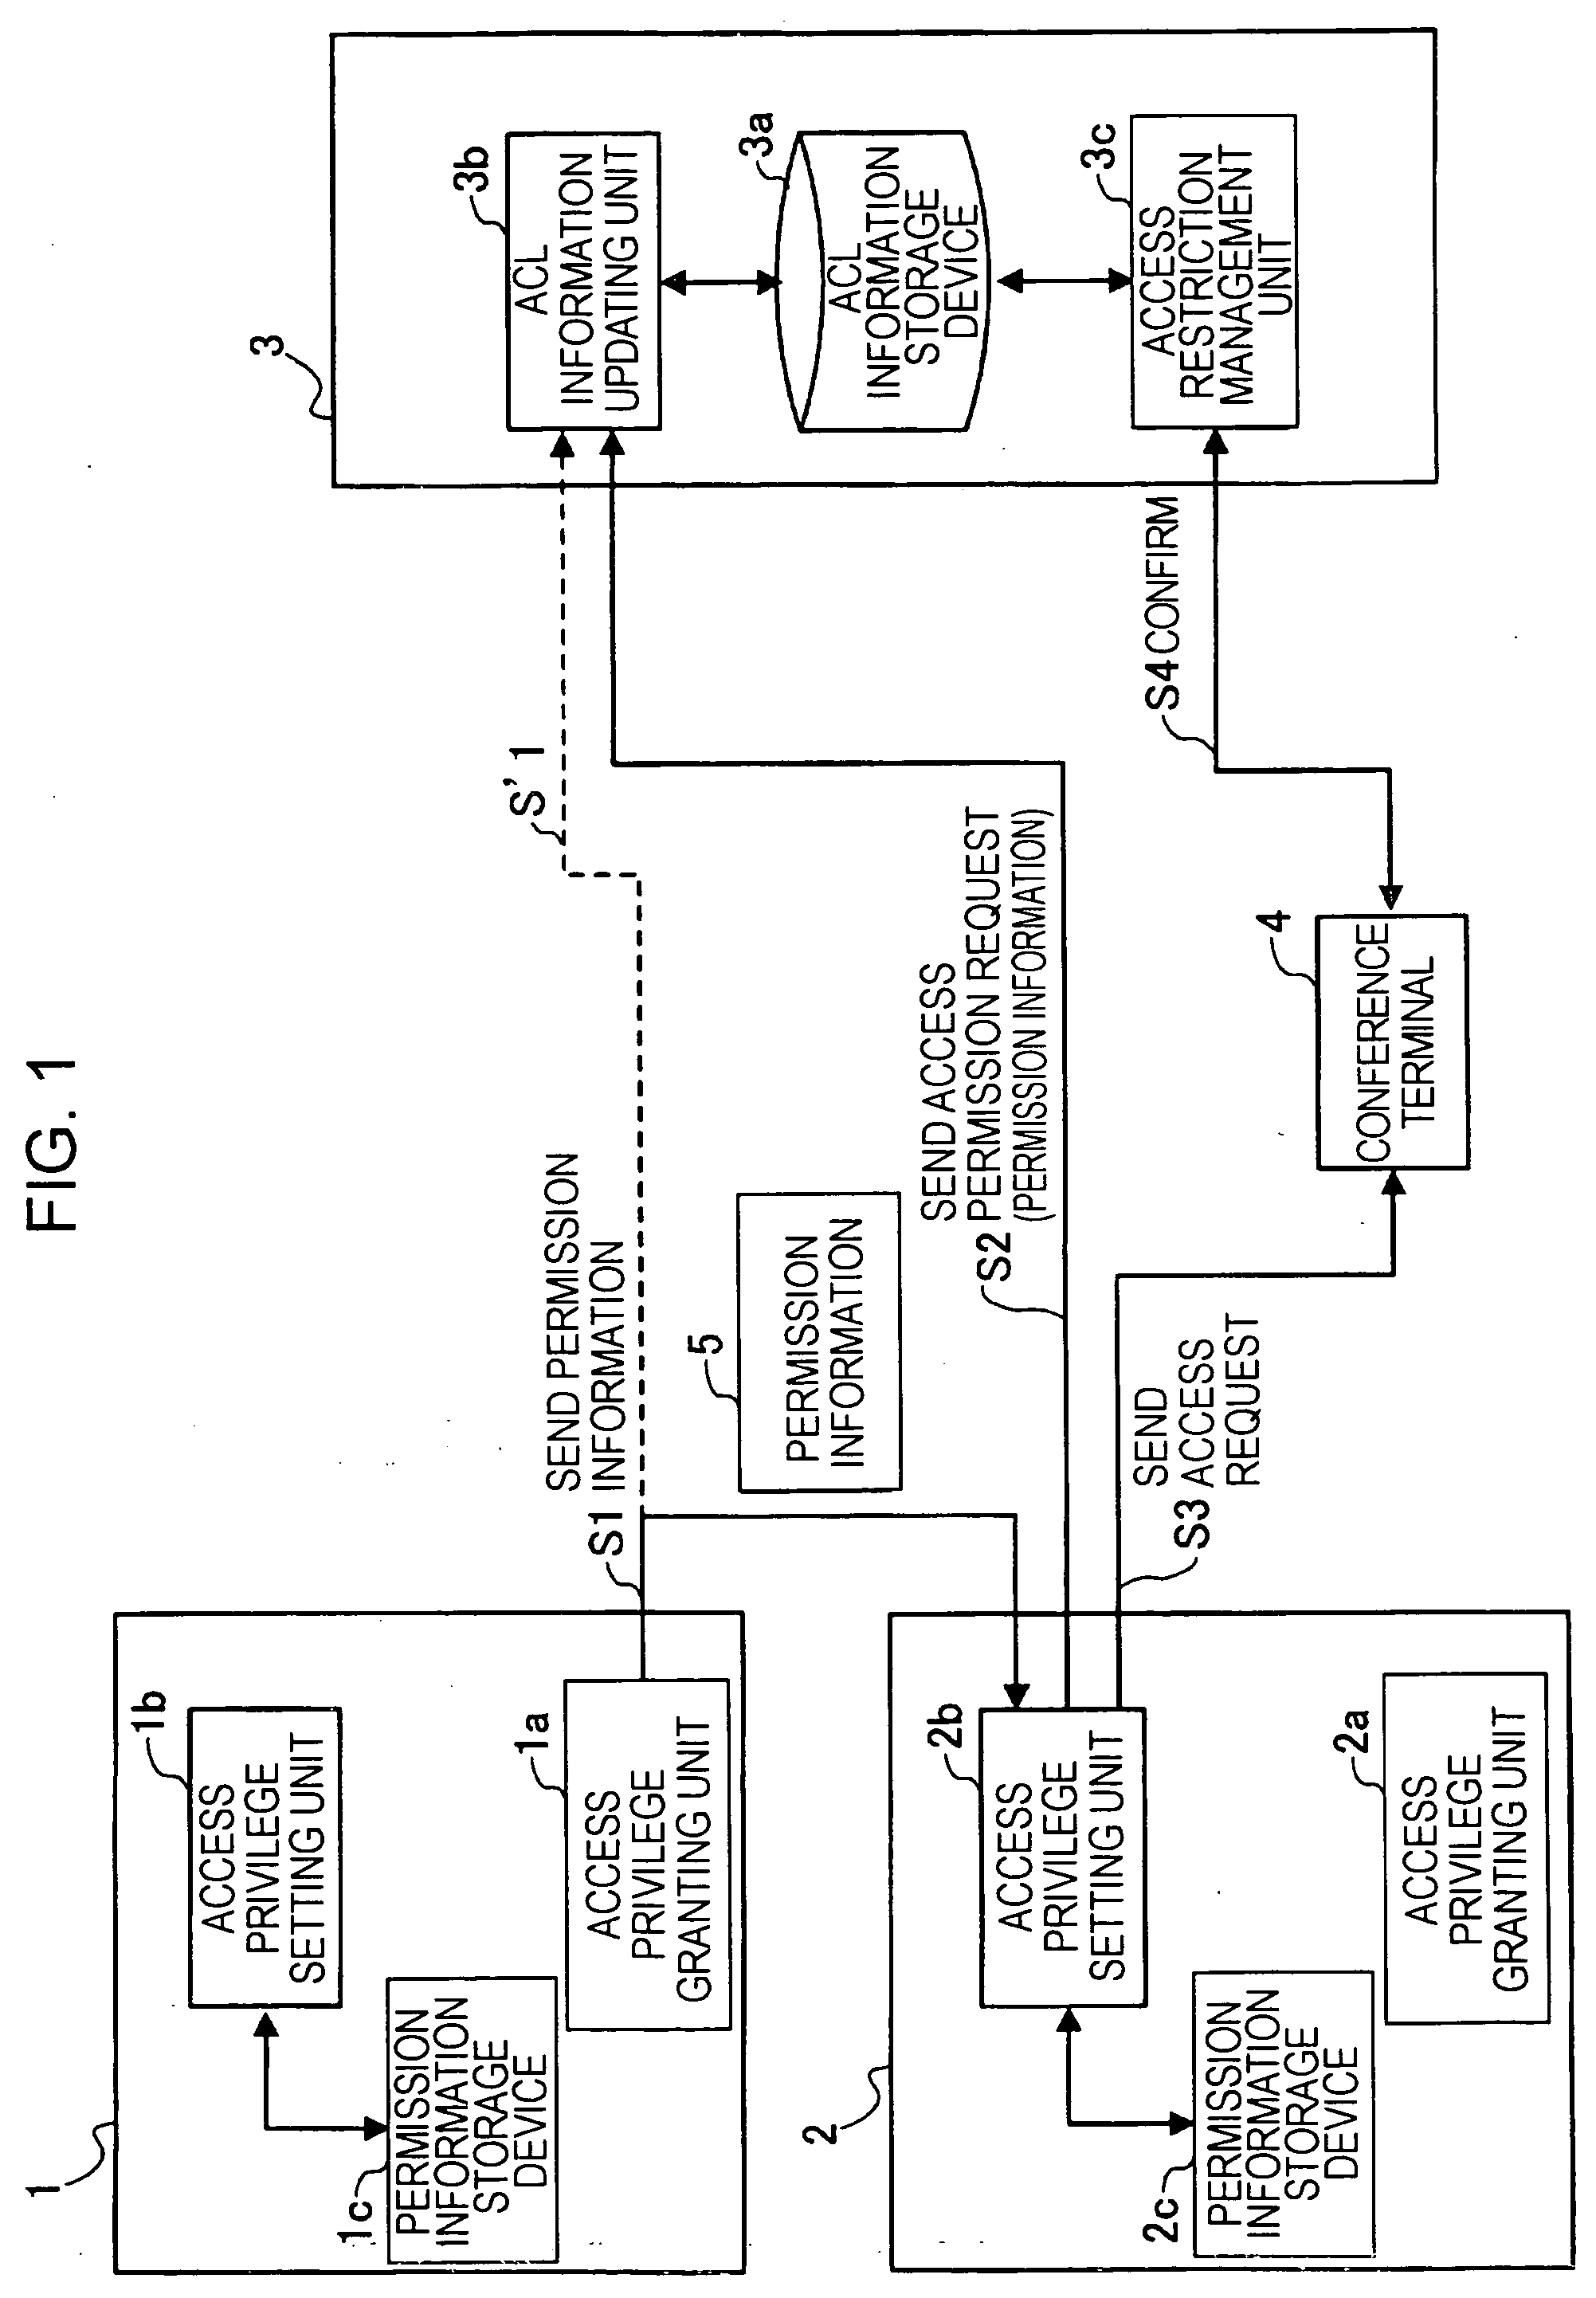 Conference system and terminal apparatus